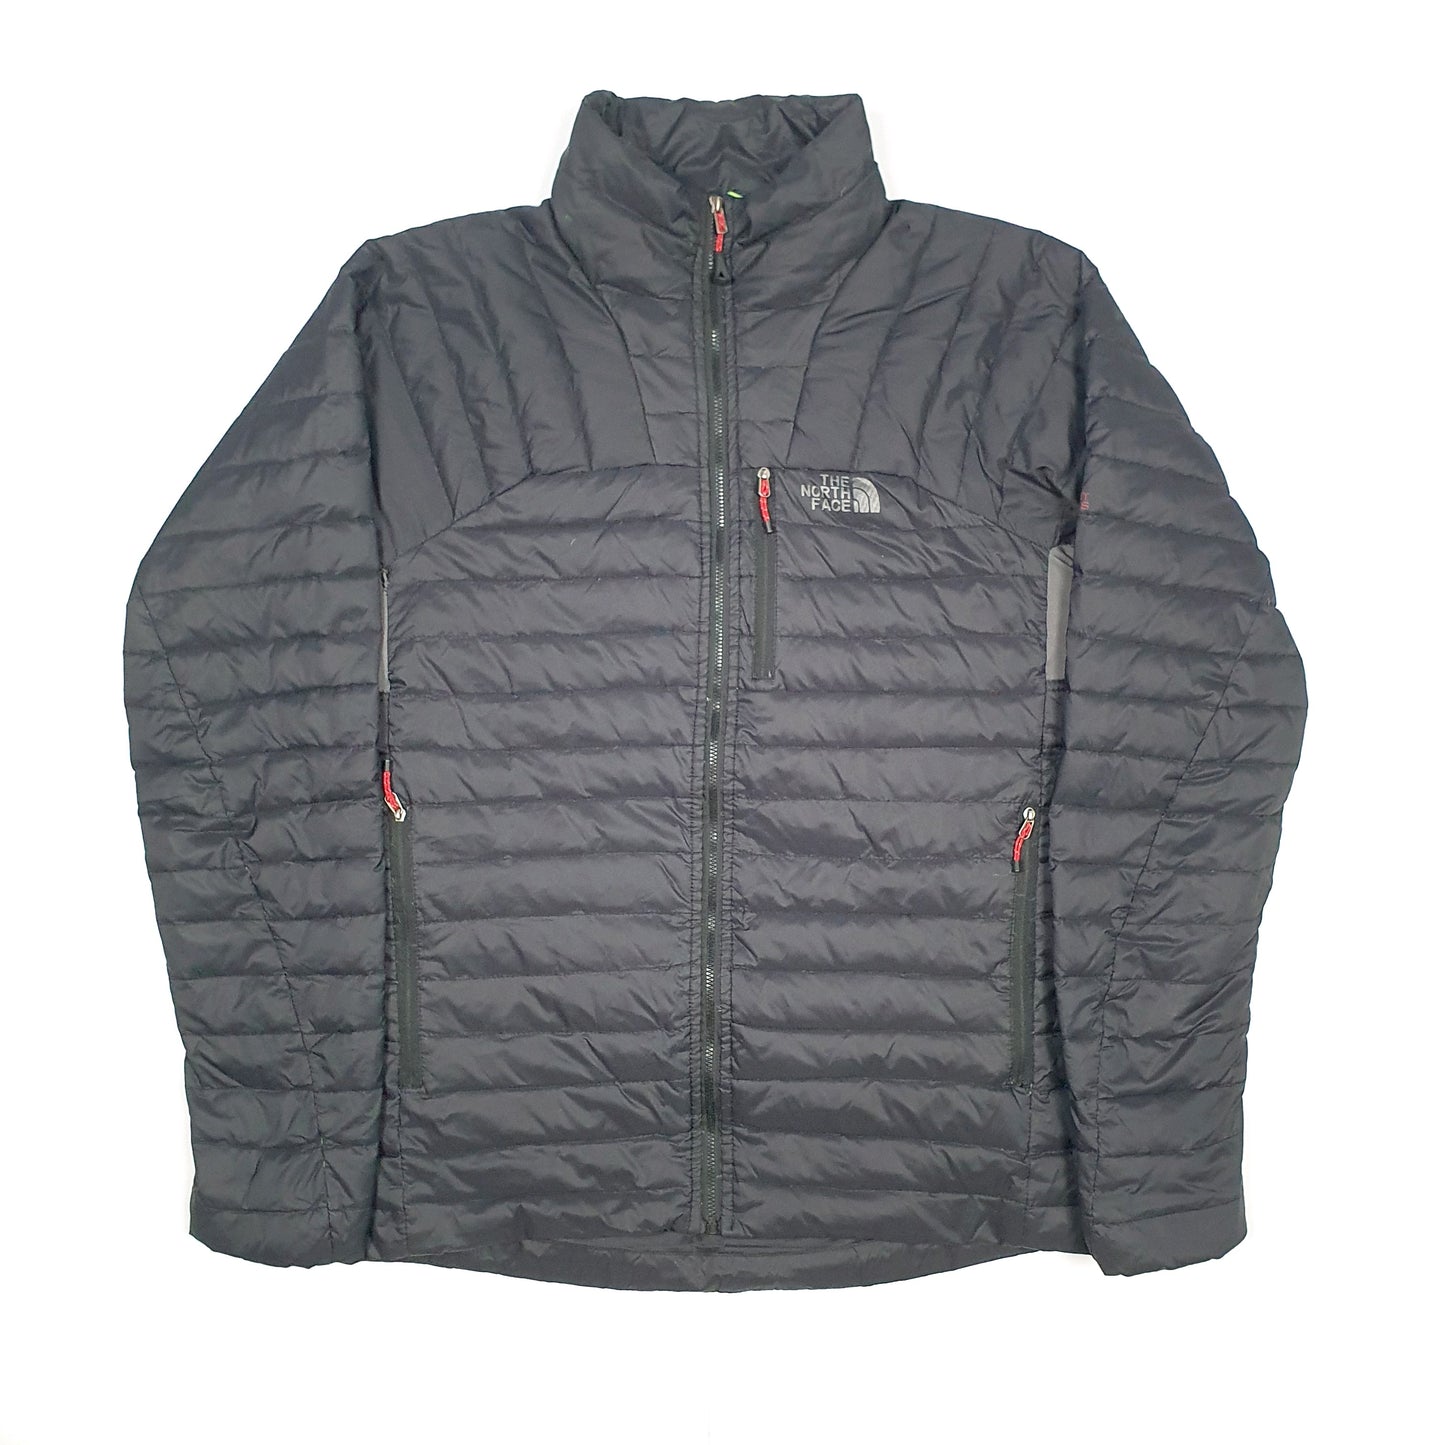 Black The North Face Puffer Jacket Coat